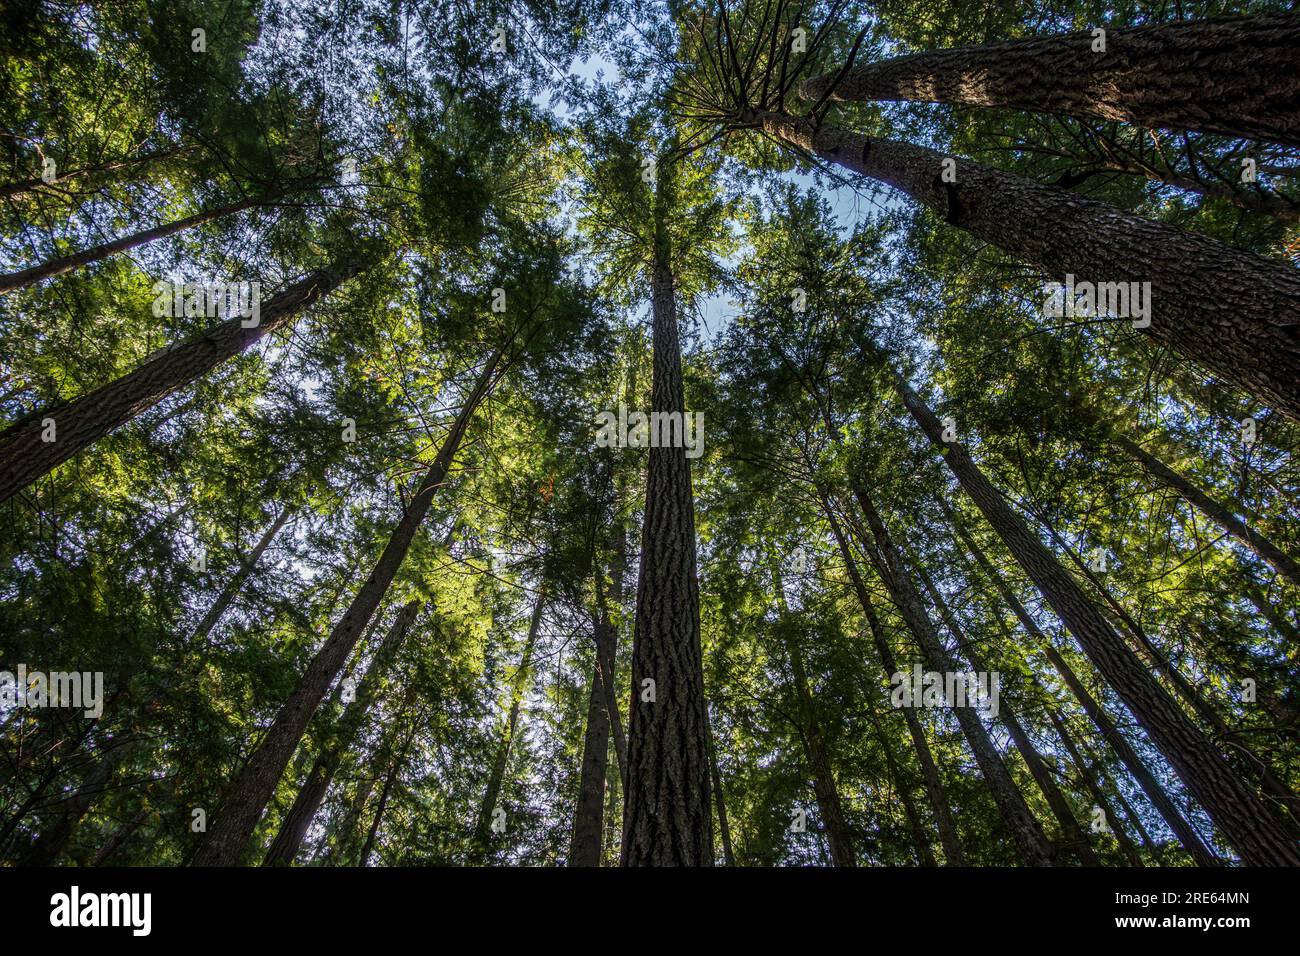 Tall trees in Strathcona Provincial Park on Vancouver Island, British Columbia, Canada. Stock Photo